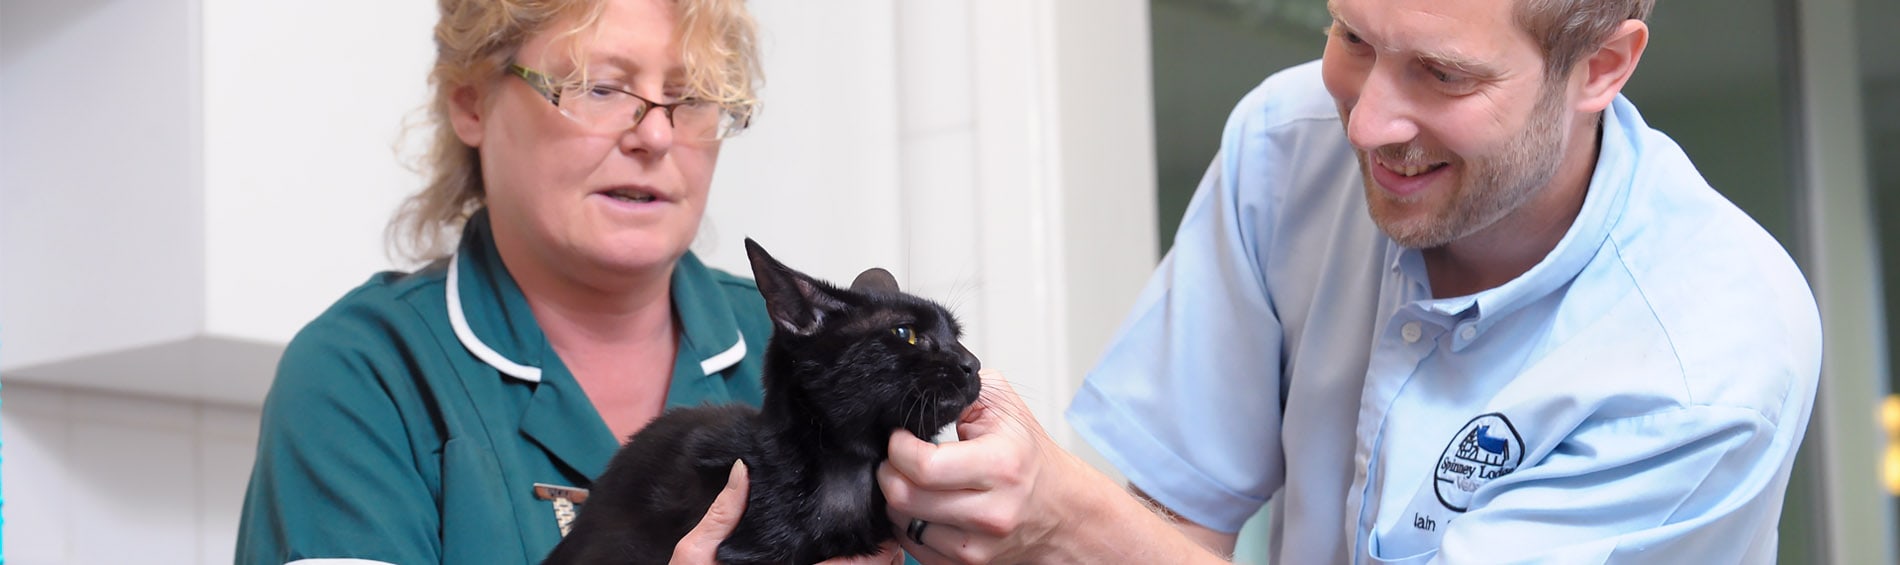 The Importance of Microchipping Cats